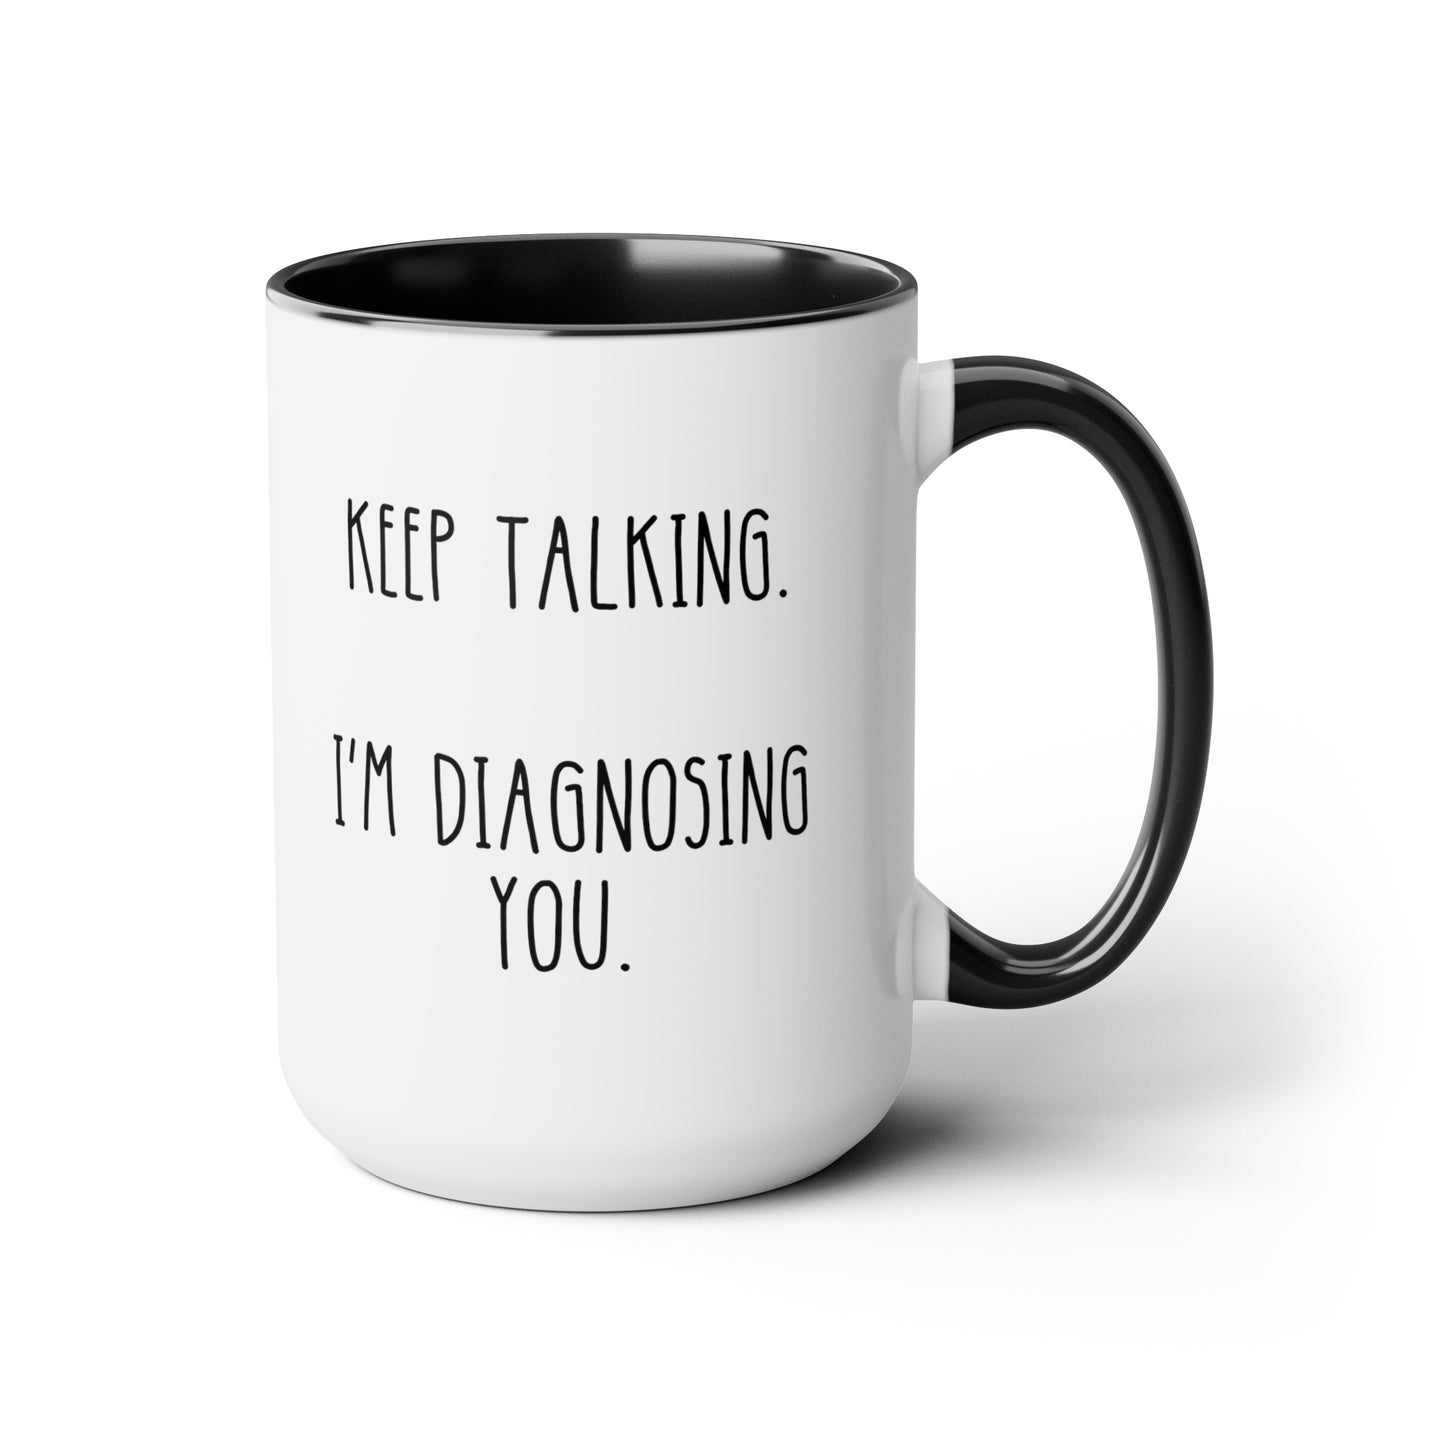 Keep Talking Im Diagnosing You 15oz white with black accent Funny large Coffee Mug Psychology Gift for Psychiatrist Therapist Counselor waveywares wavey wares wavywares wavy wares